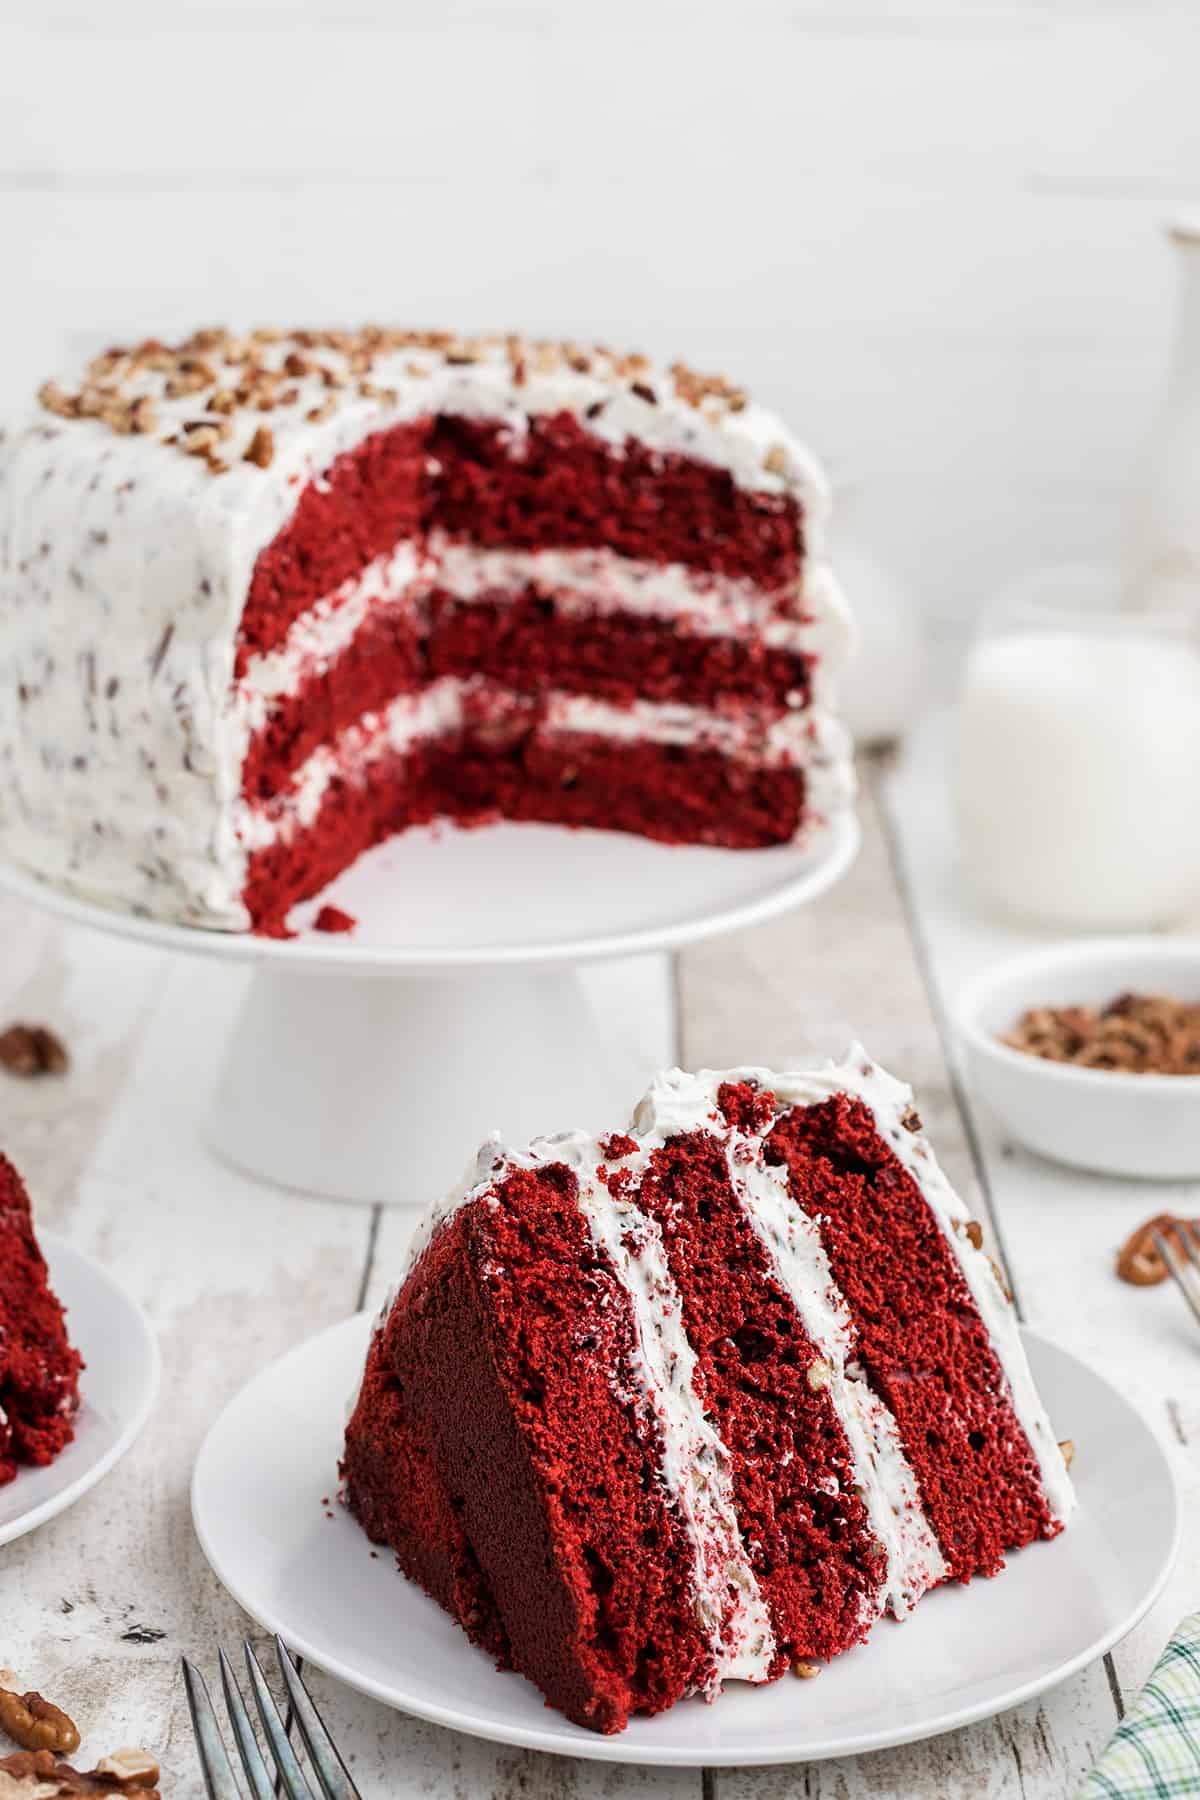 Finished red velvet cake with a slice held on a plate.